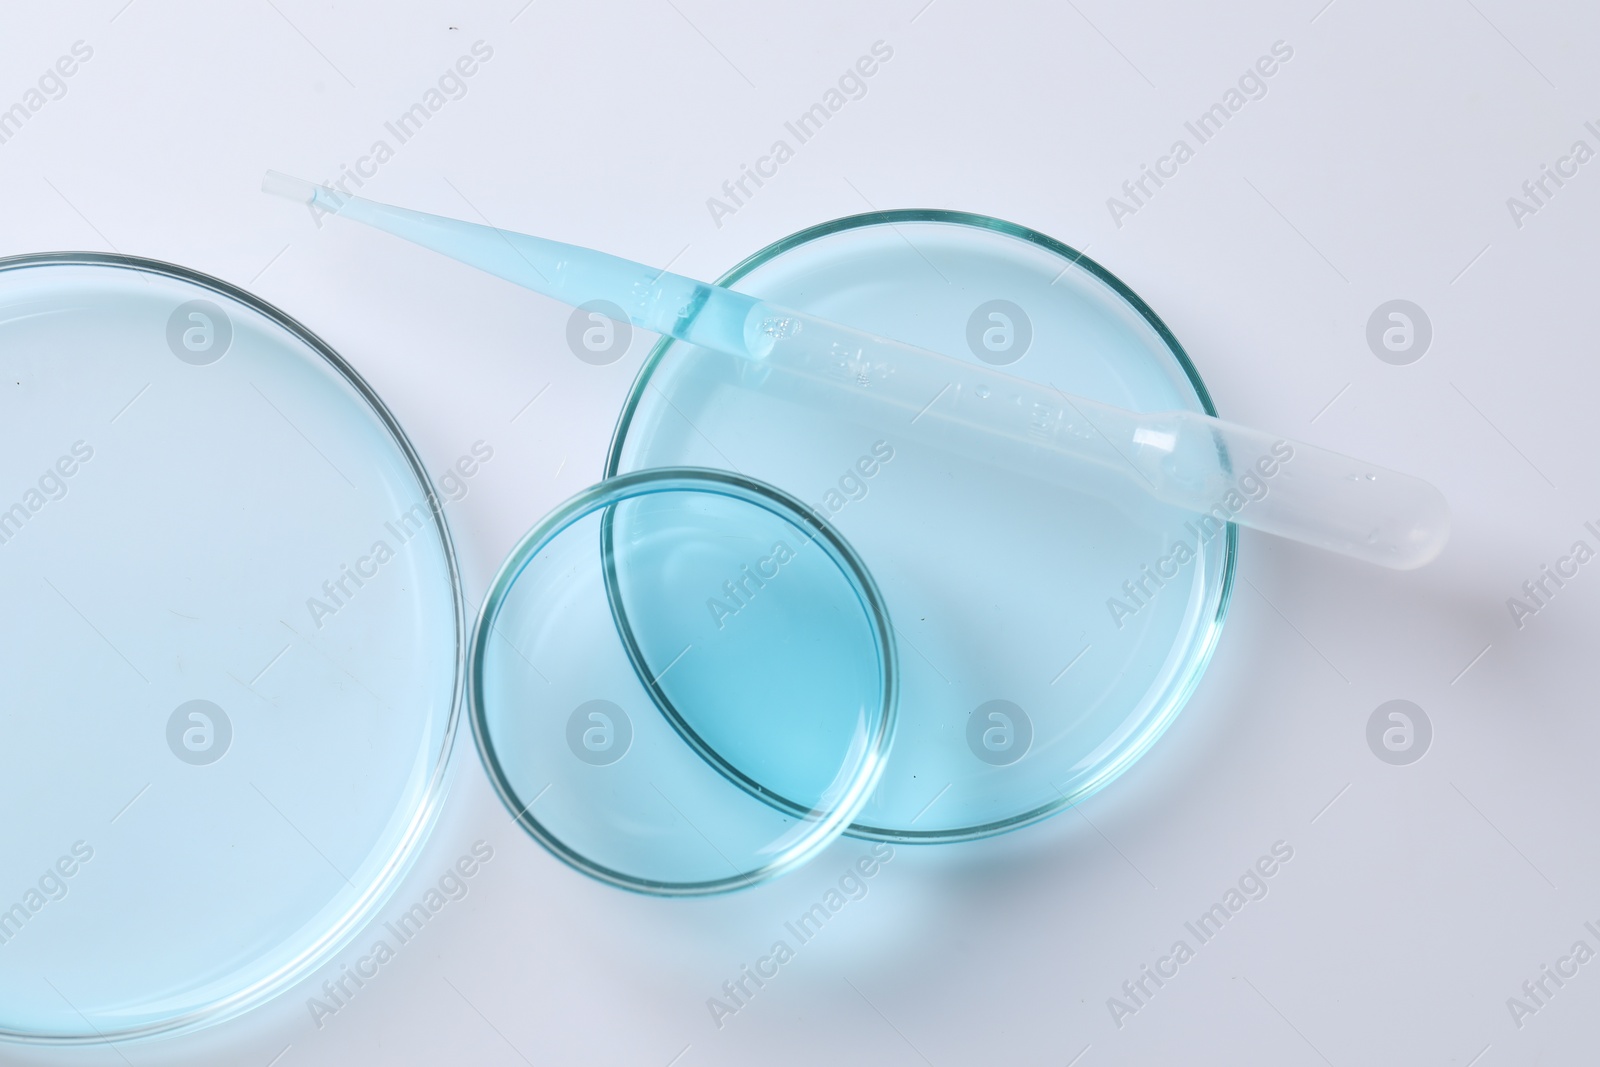 Photo of Transfer pipette and petri dishes on white table, flat lay